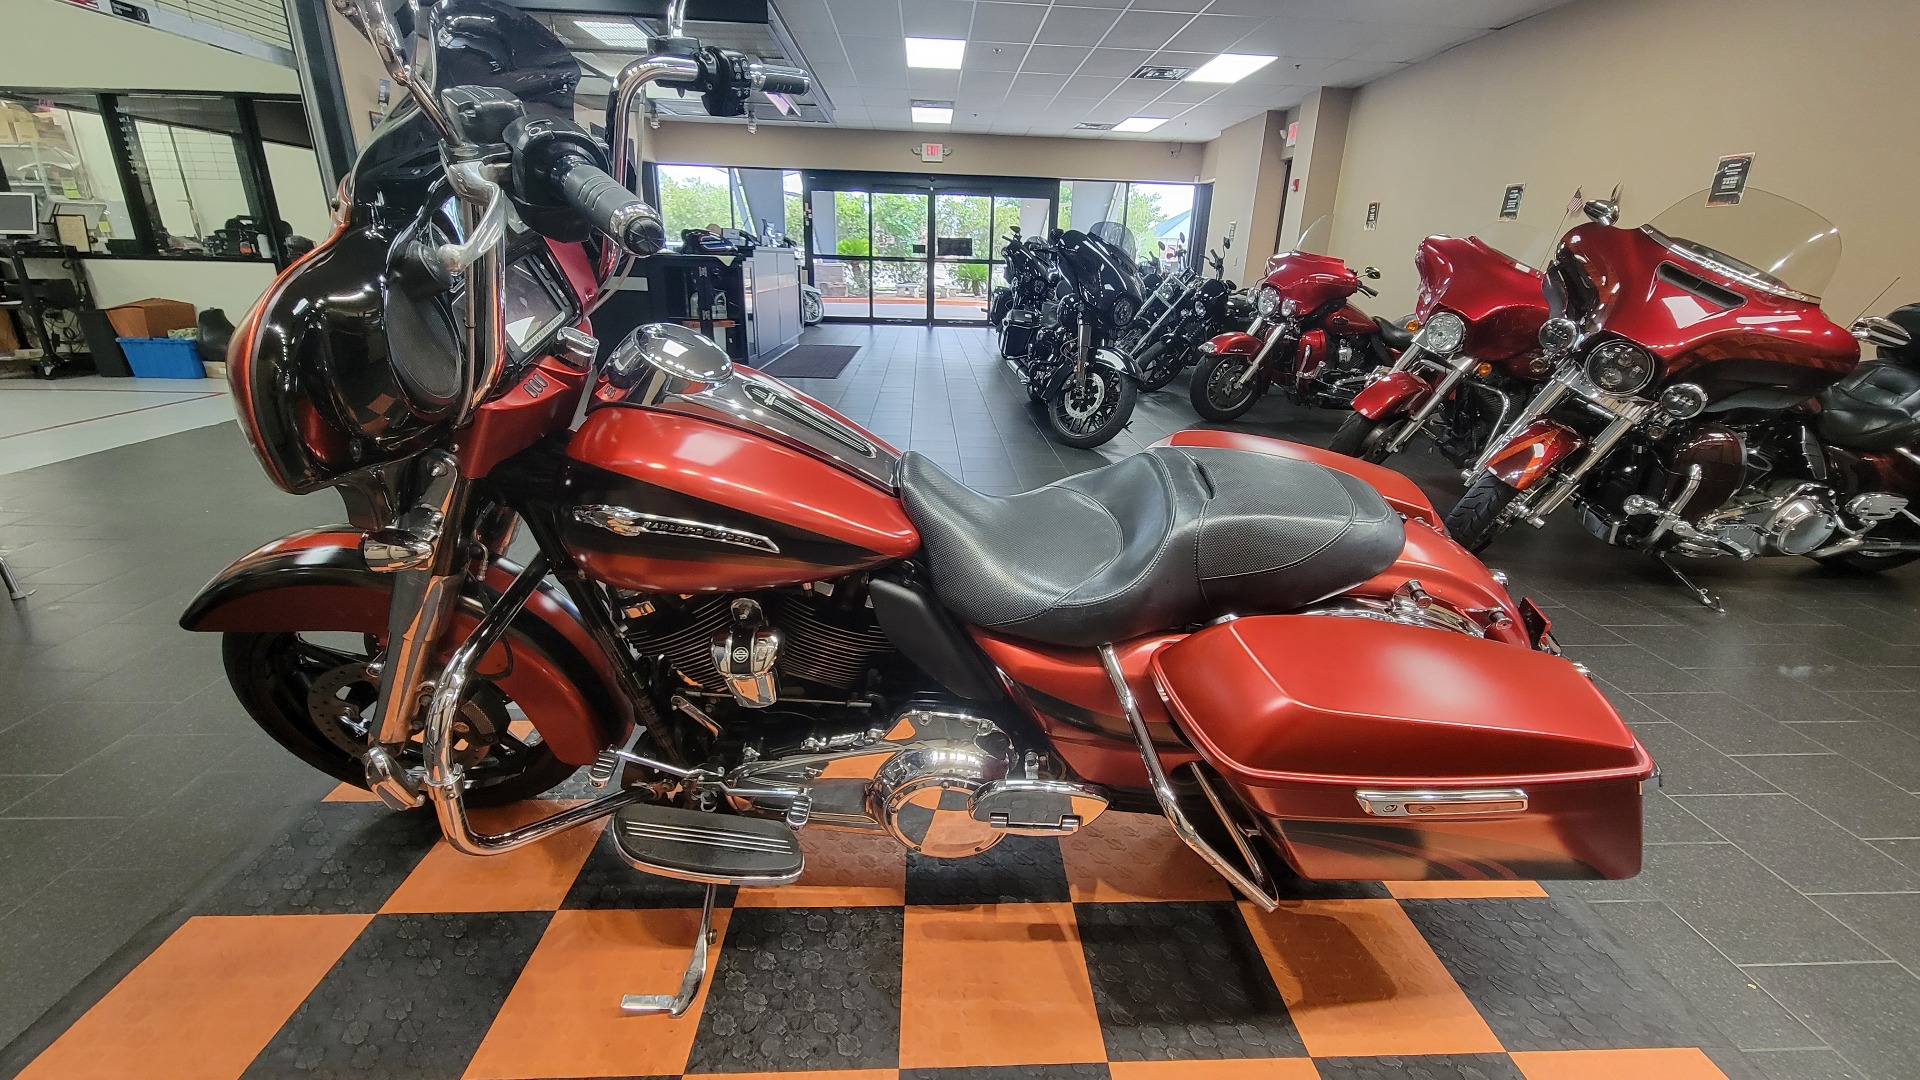 2017 Harley-Davidson Street Glide® Special in The Woodlands, Texas - Photo 4